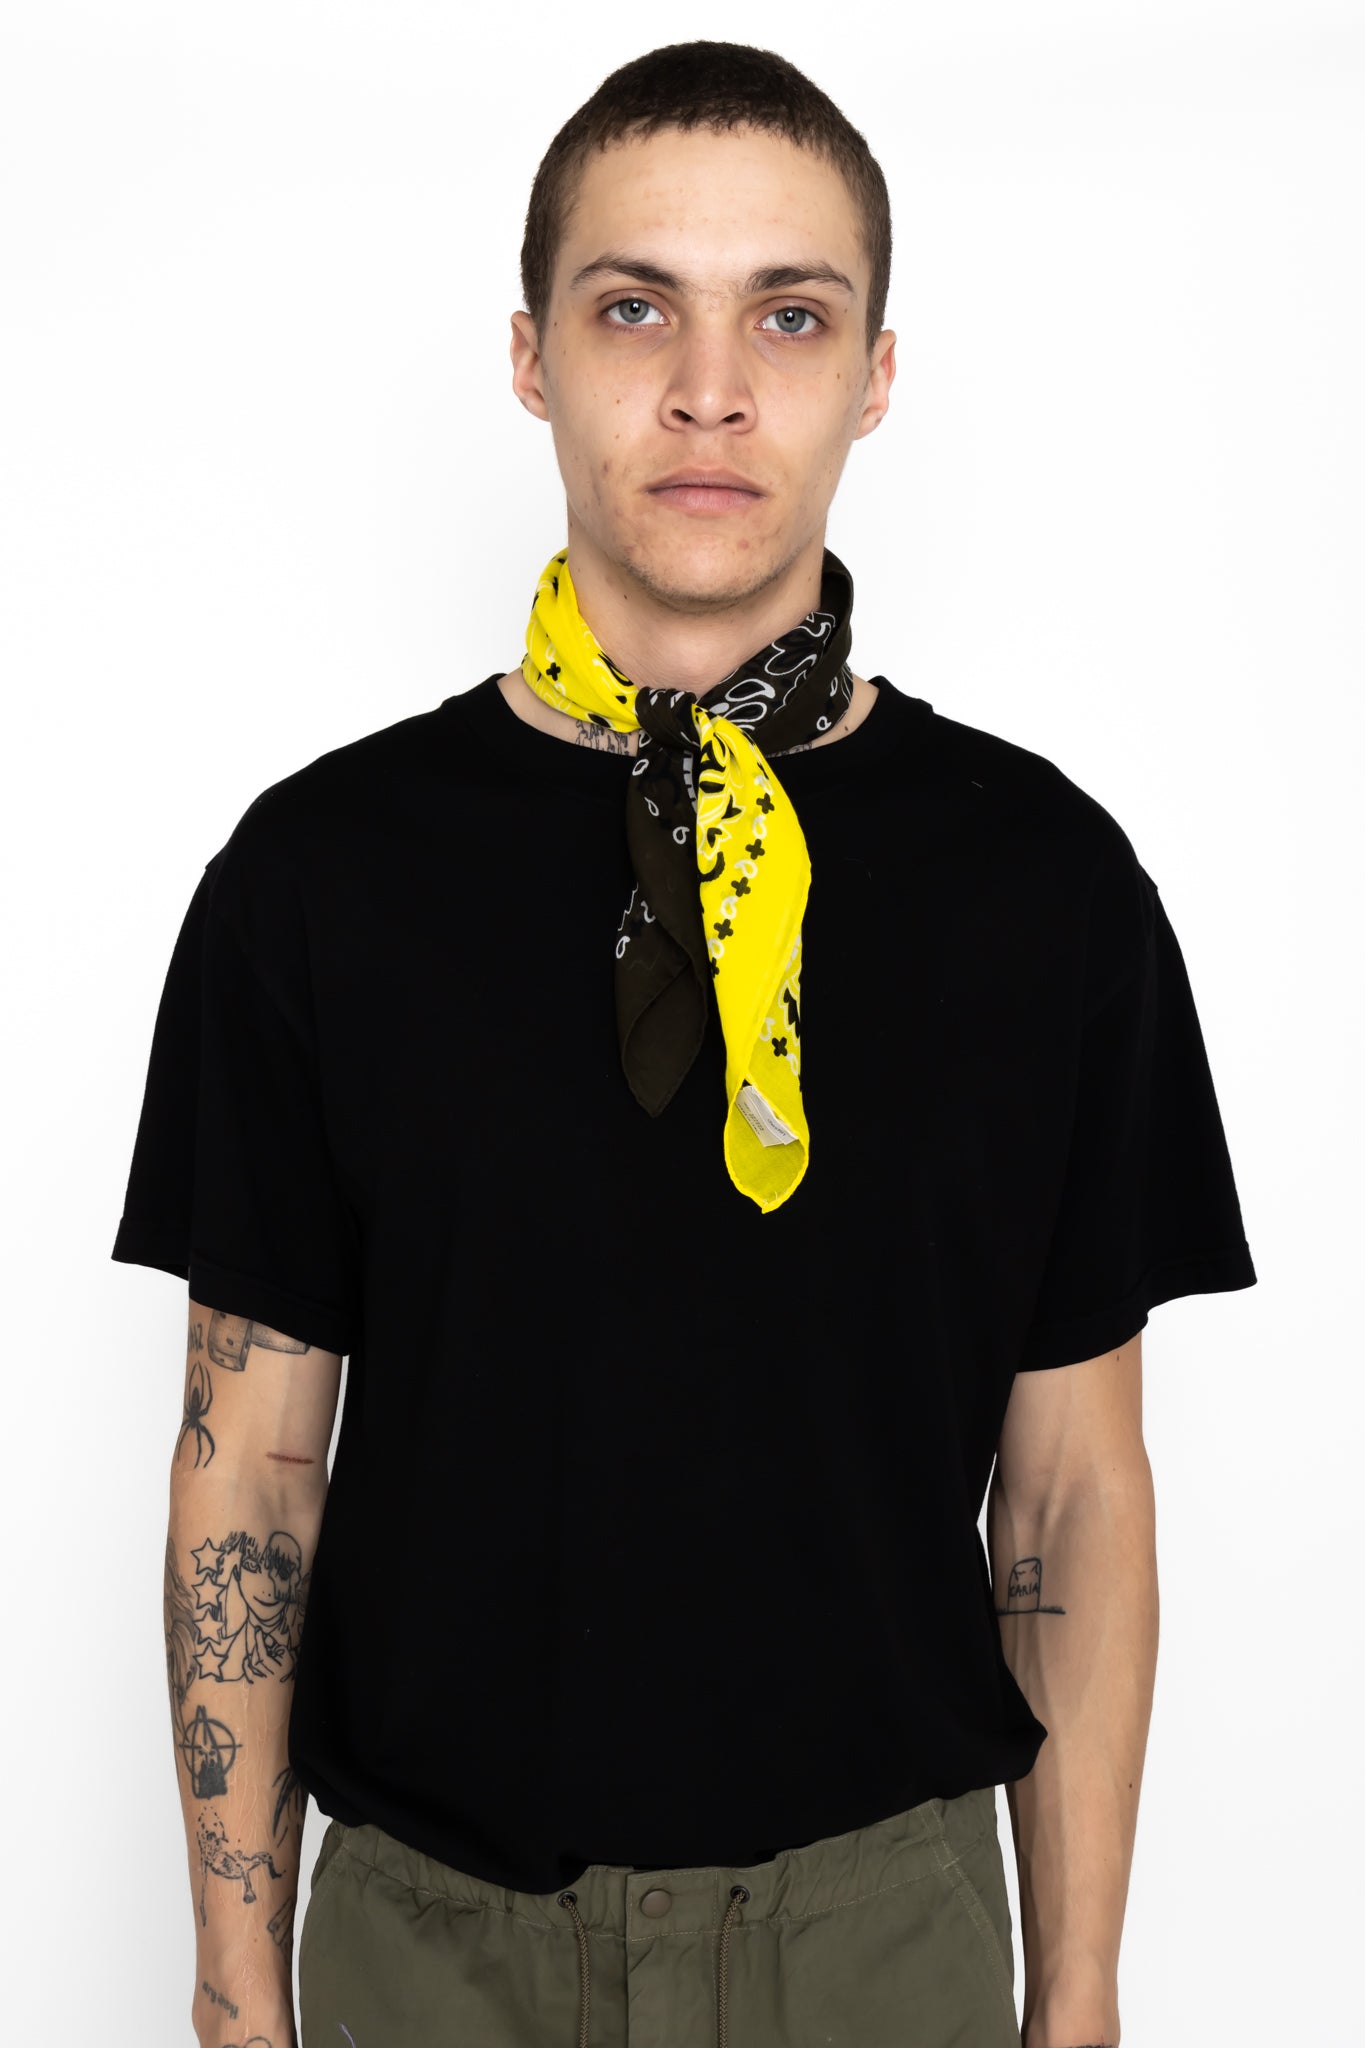 Destin Italian made Bandana. Use as multipurpose scarf or bandana wrap. Color: Yellow x Army Green 2 tone. Extra fine cotton Light and soft touch 100% cotton Made in Italy Size: 23.5" x 23.5". Unisex